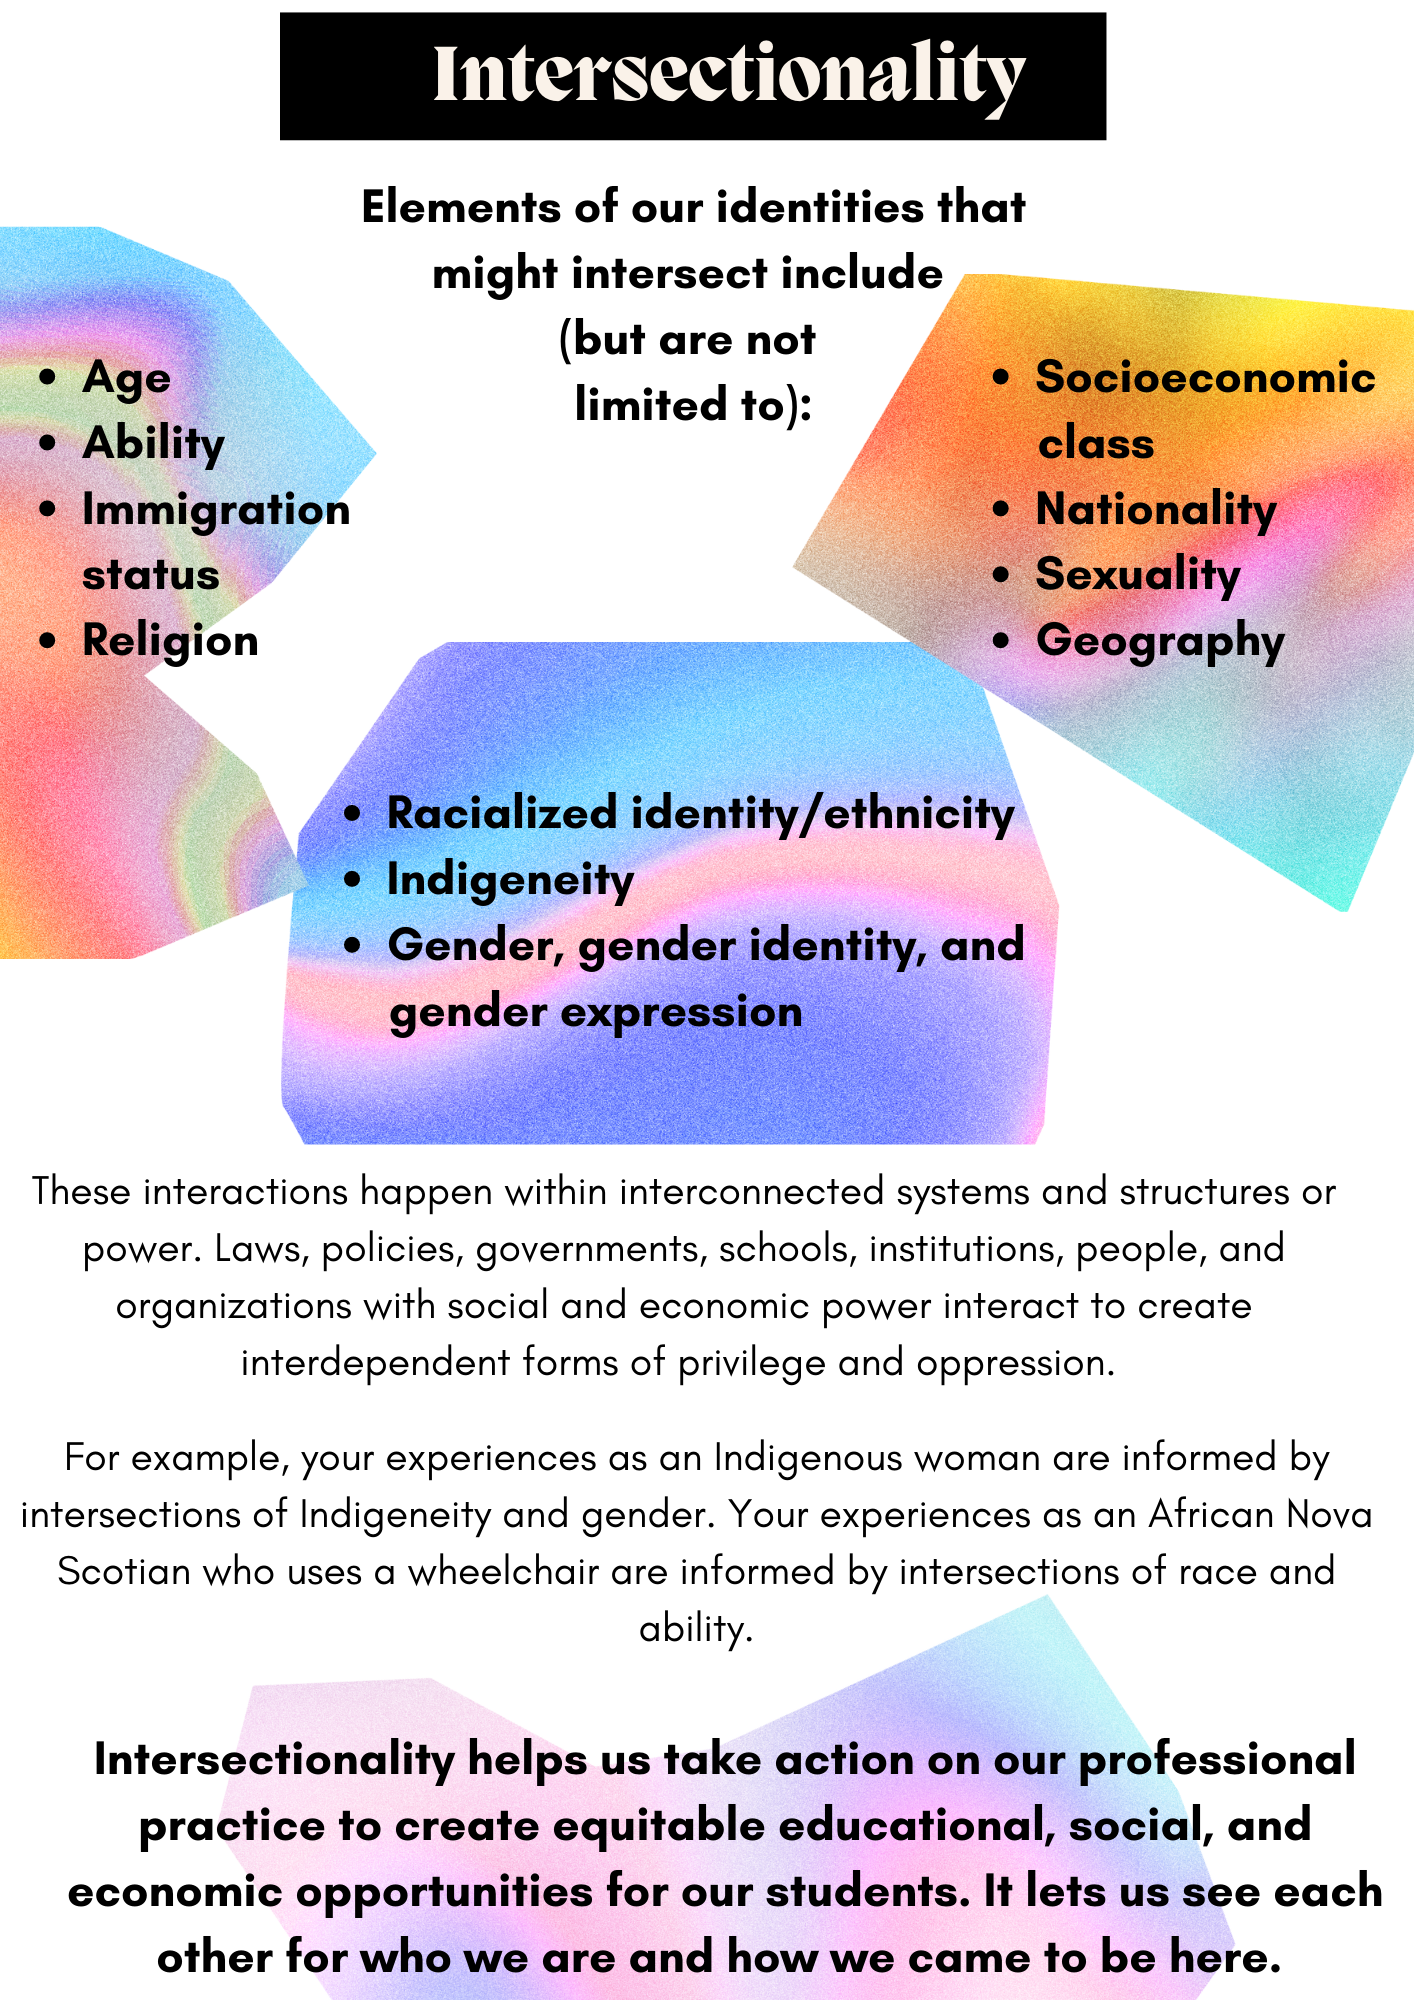 Title: Intersectionality Elements of our identities that might intersect include (but are not limited to): Age, Ability, Immigration status, Religion, Socioeconomic, Nationality , Sexuality , Geography, Racialized identity/ethnicity, Indigeneity, Gender, gender identity, and gender expression. These interactions happen within interconnected systems and structures or power. Laws, policies, governments, schools, institutions, people, and organizations with social and economic power interact to create interdependent forms of privilege and oppression. For example, your experiences as an Indigenous woman are informed by intersections of Indigeneity and gender. Your experiences as an African Nova Scotian who uses a wheelchair are informed by intersections of race and ability. Intersectionality helps us take action on our professional practice to create equitable educational, social, and economic opportunities for our students. It lets us see each other for who we are and how we came to be here.